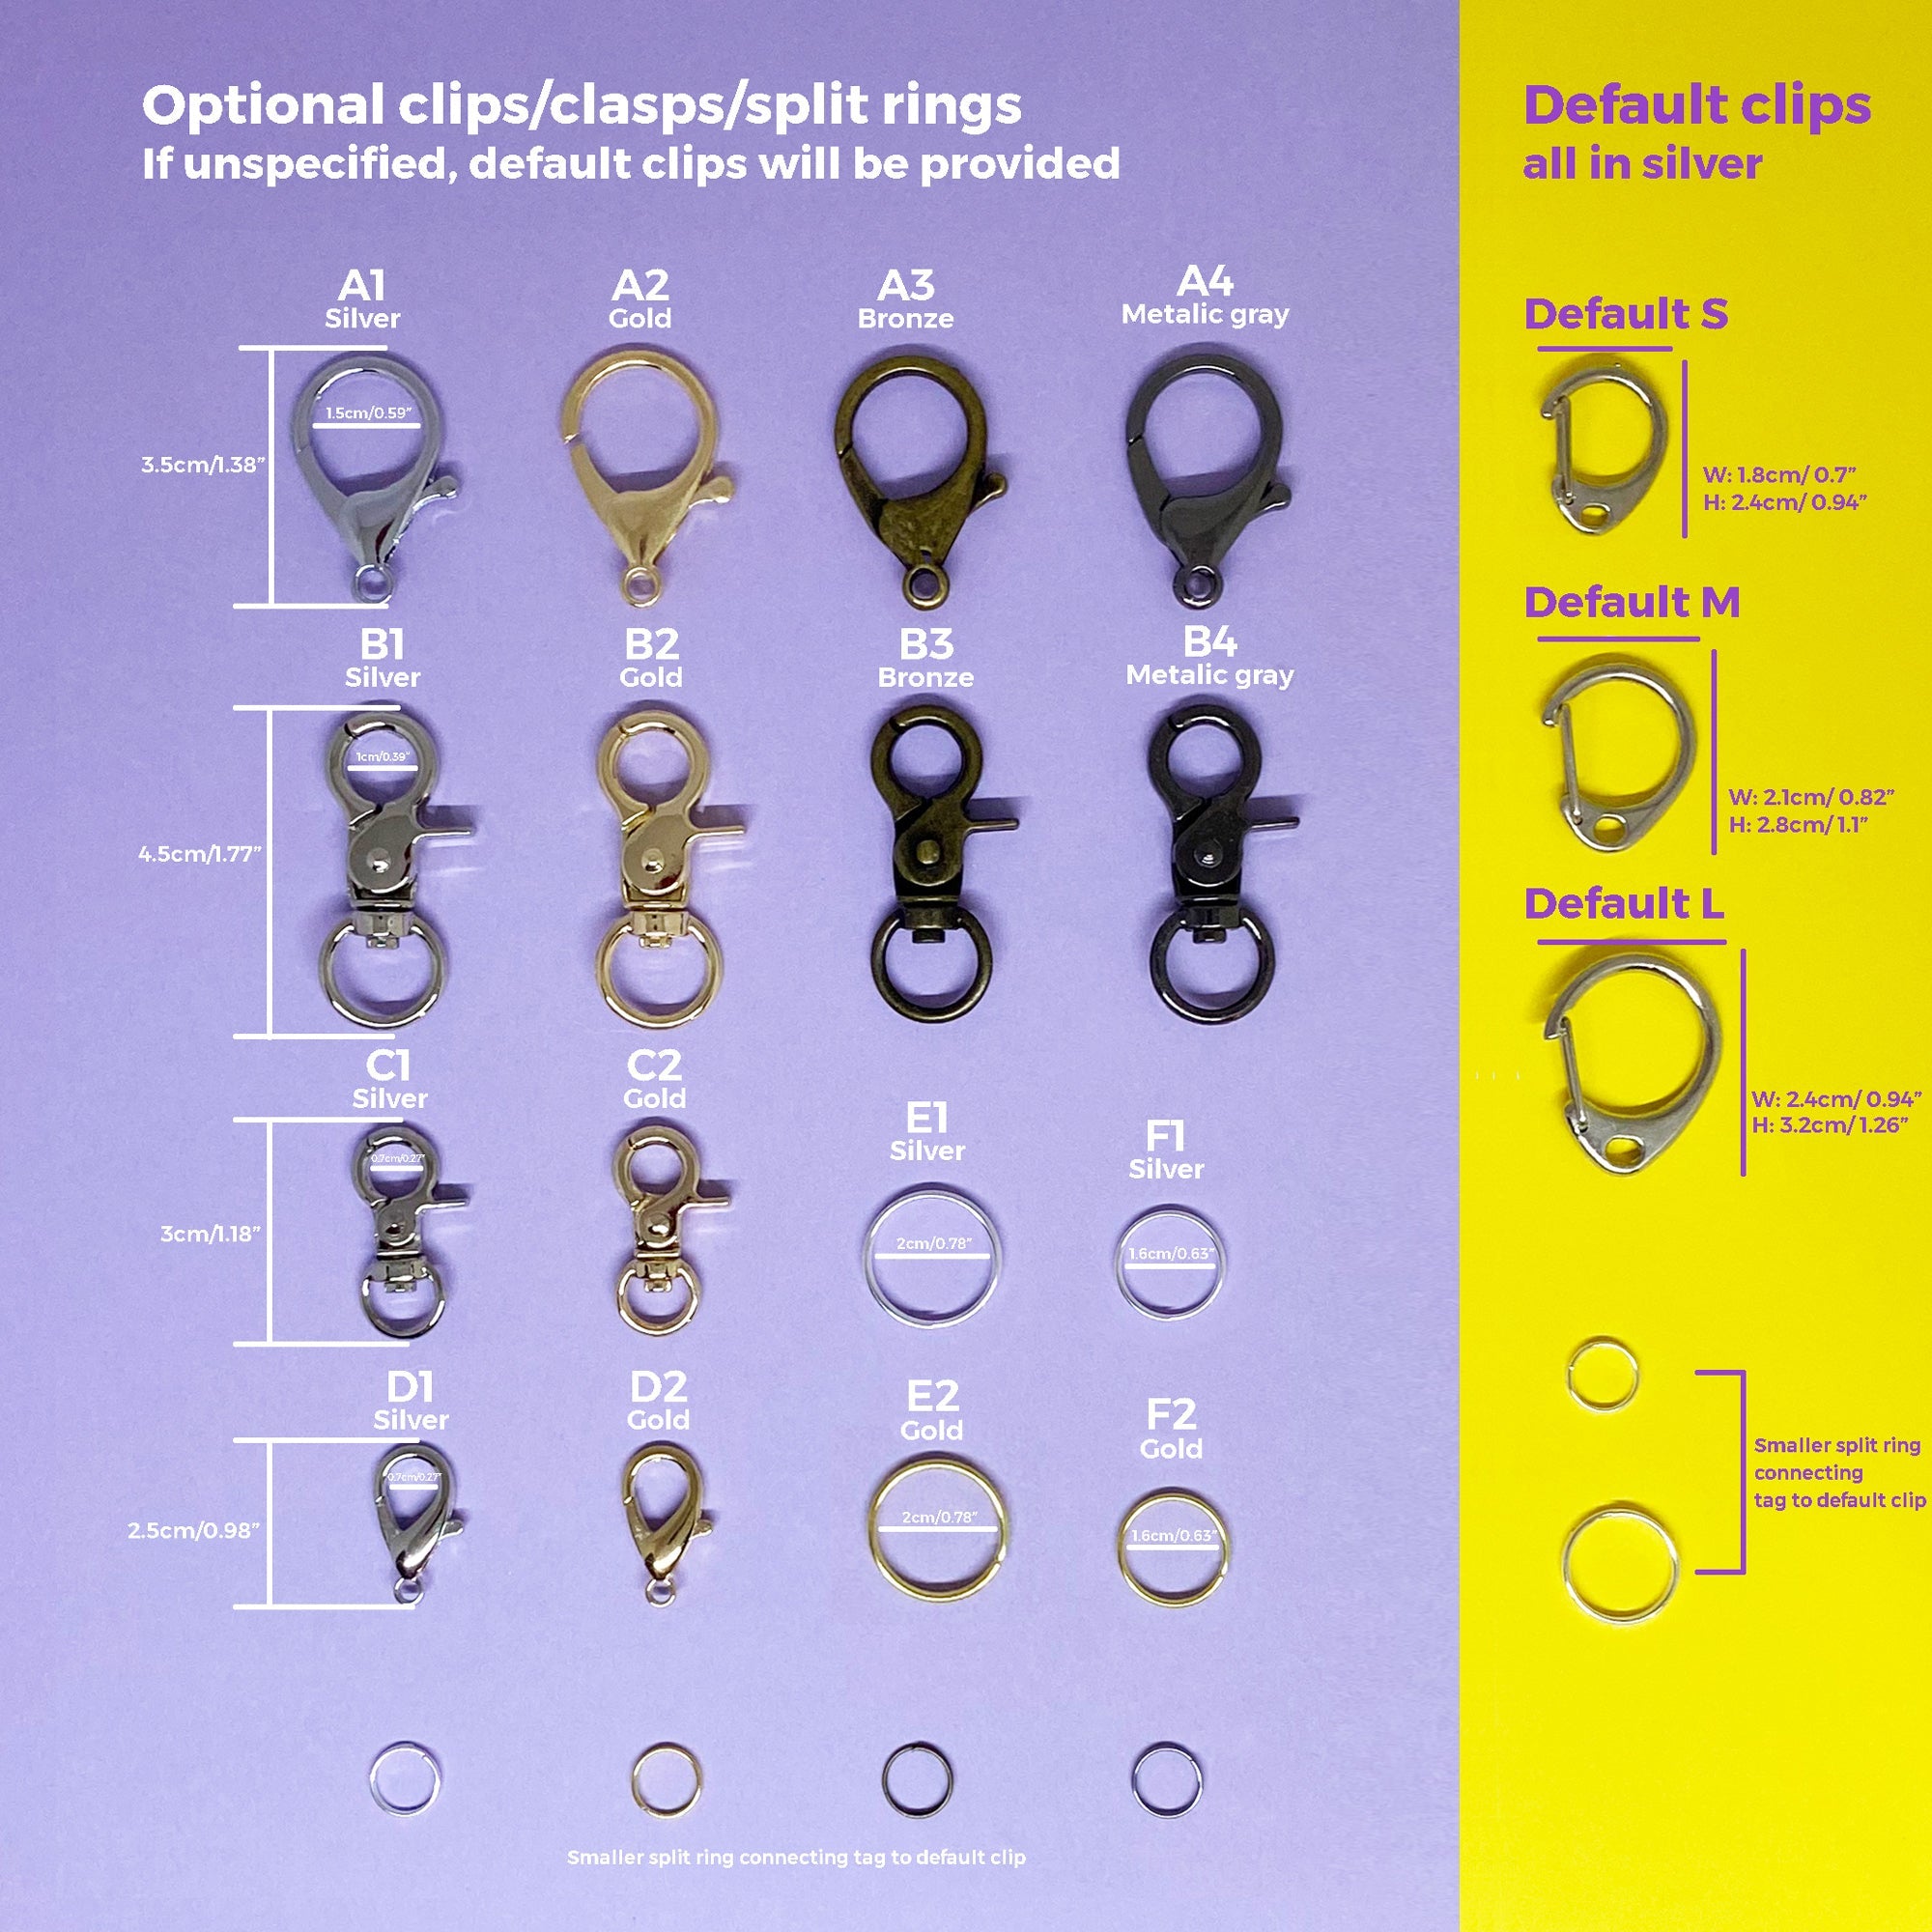 Standard clasps and rings for Bashtags